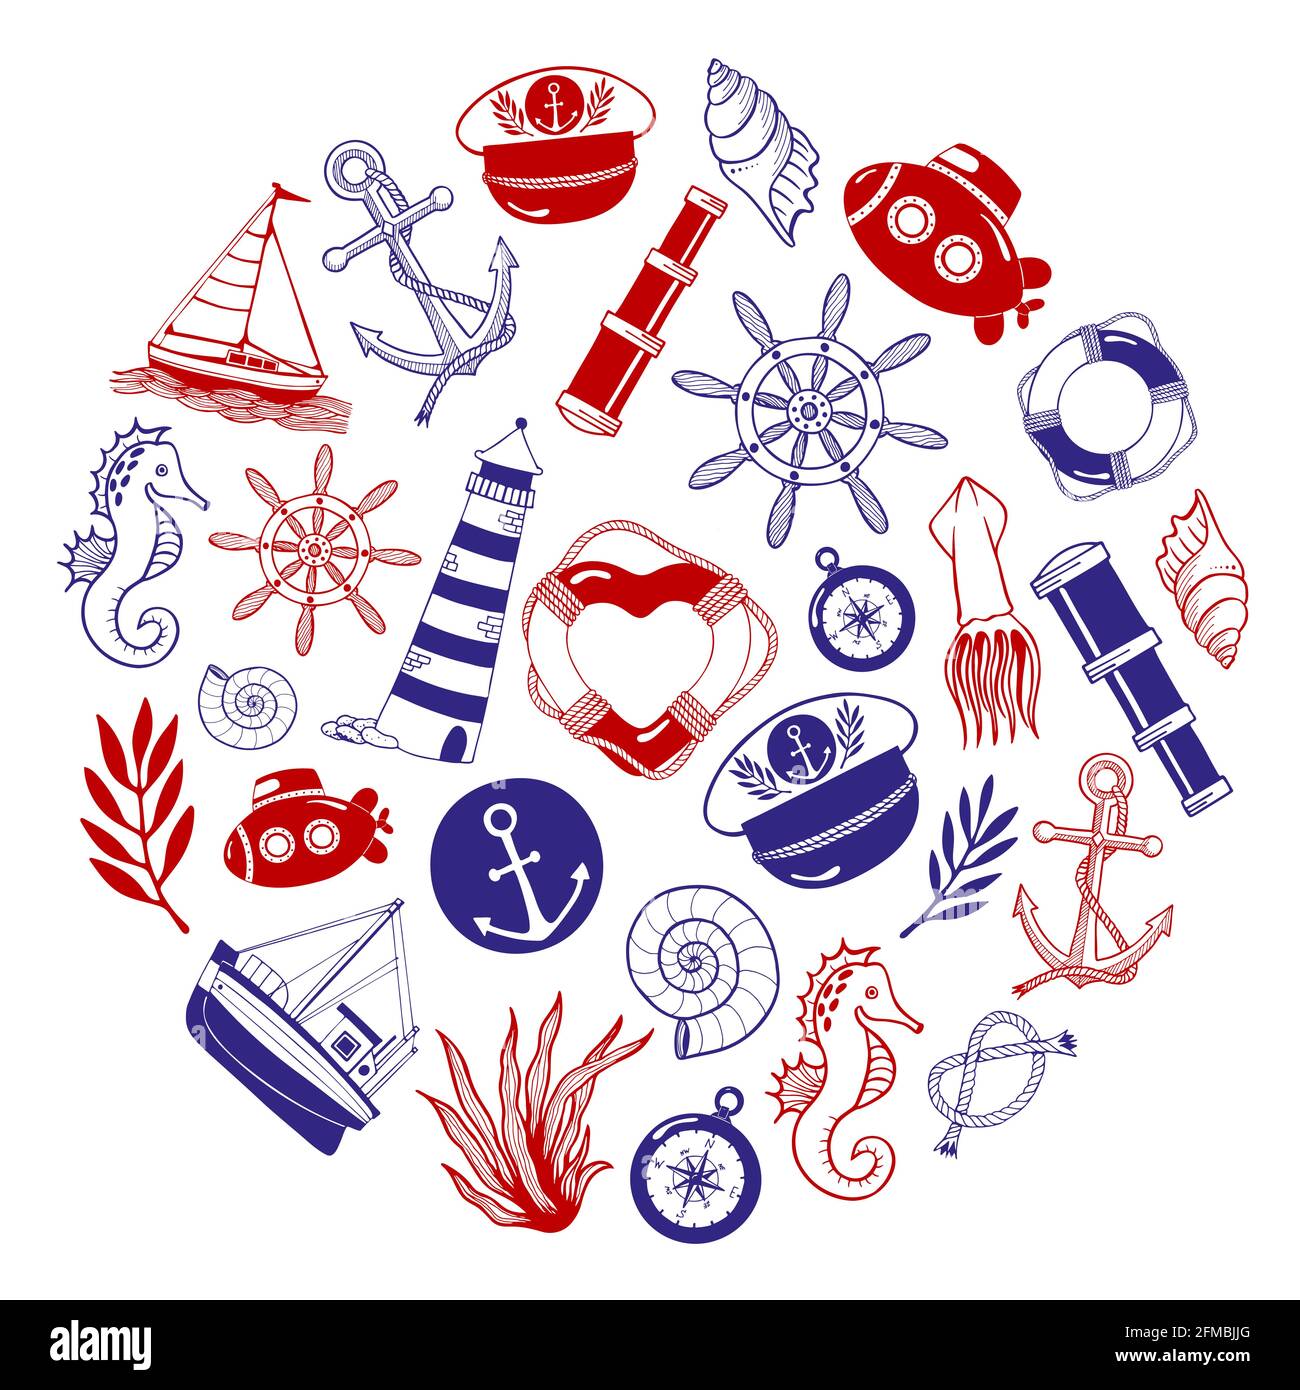 Set of nautical icons Stock Vector